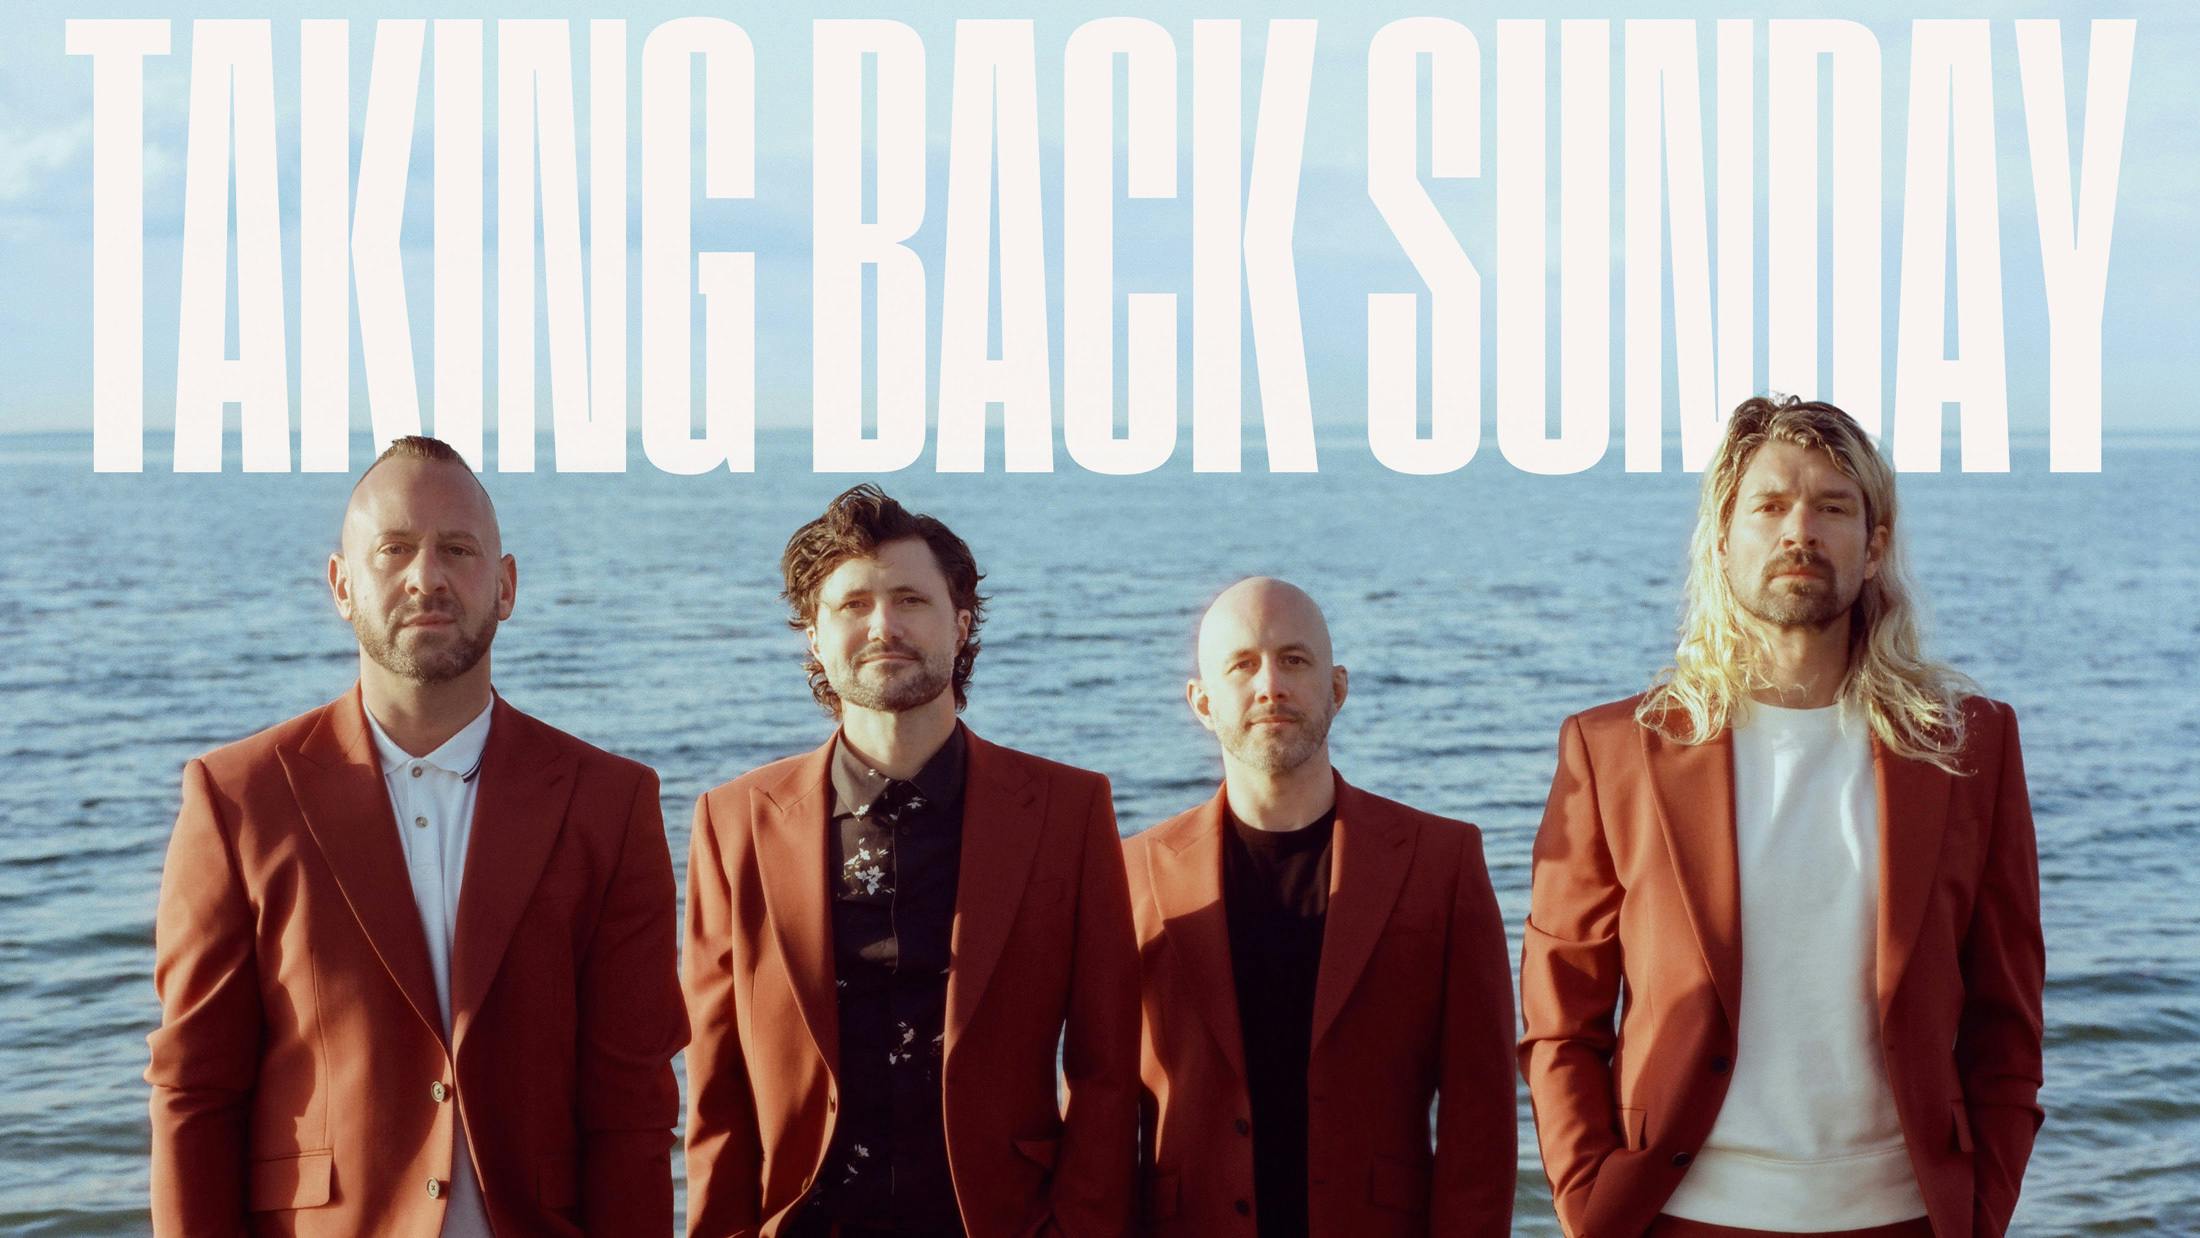 Get your signed copy of Taking Back Sunday’s new album 152